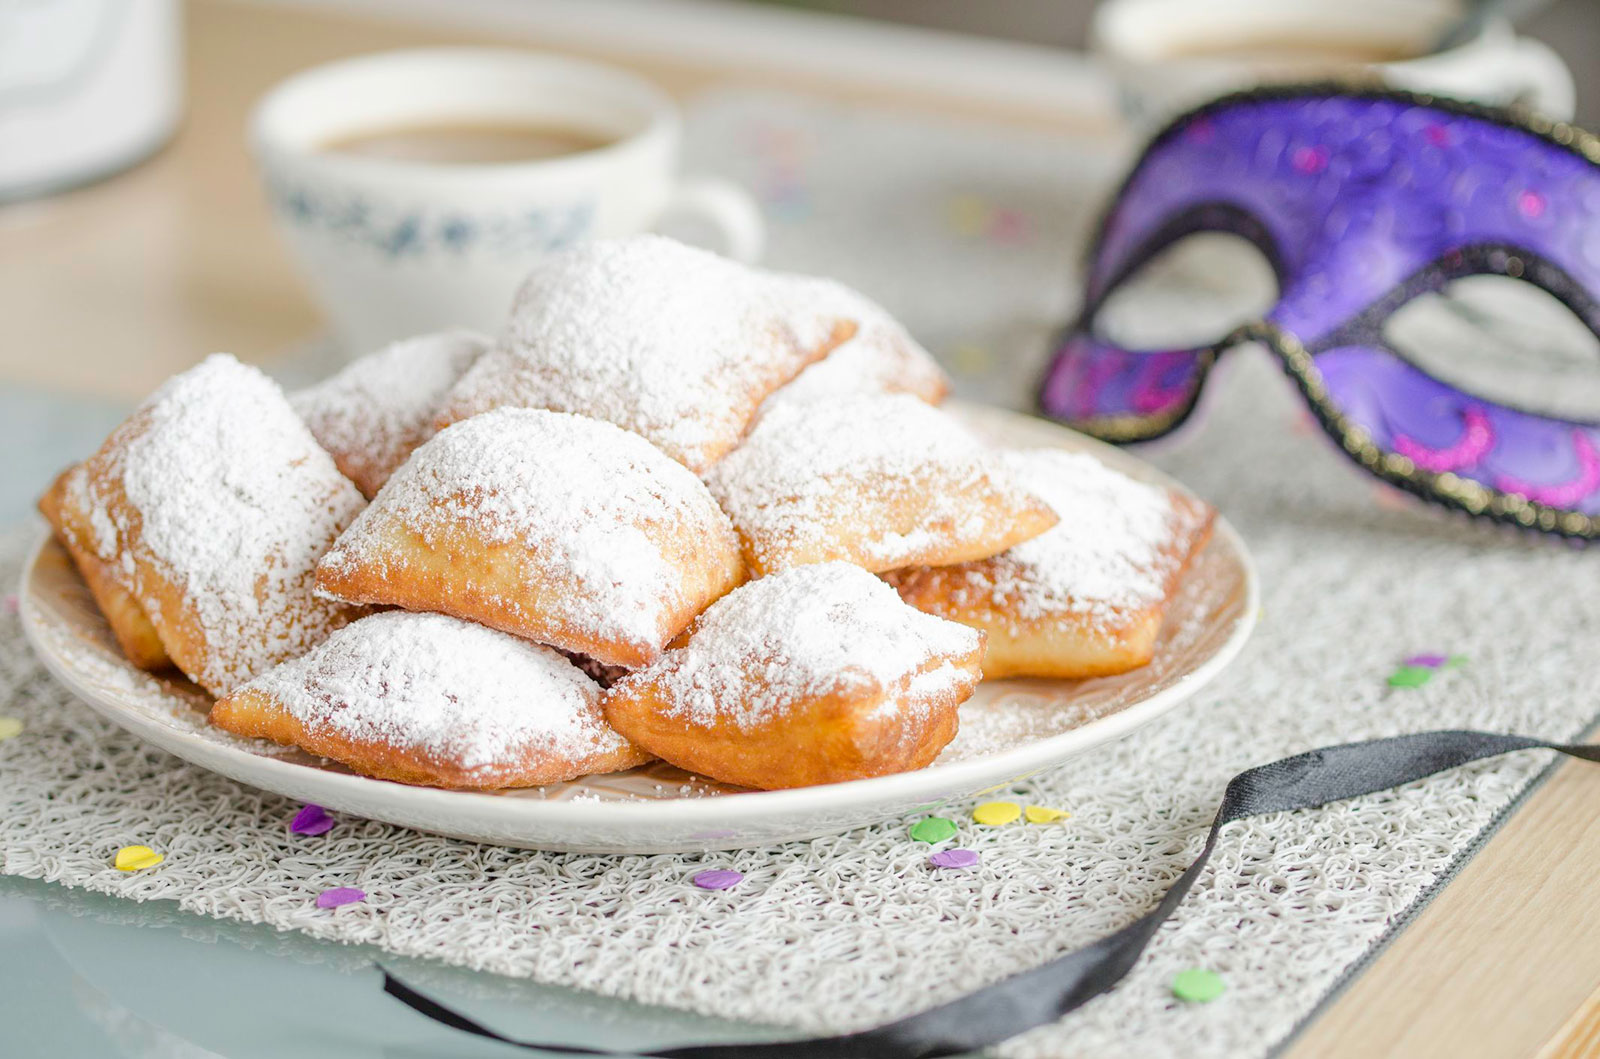 Challenge Yourself in This General Knowledge Quiz — Do You Have What It Takes to Score 75%? Beignets